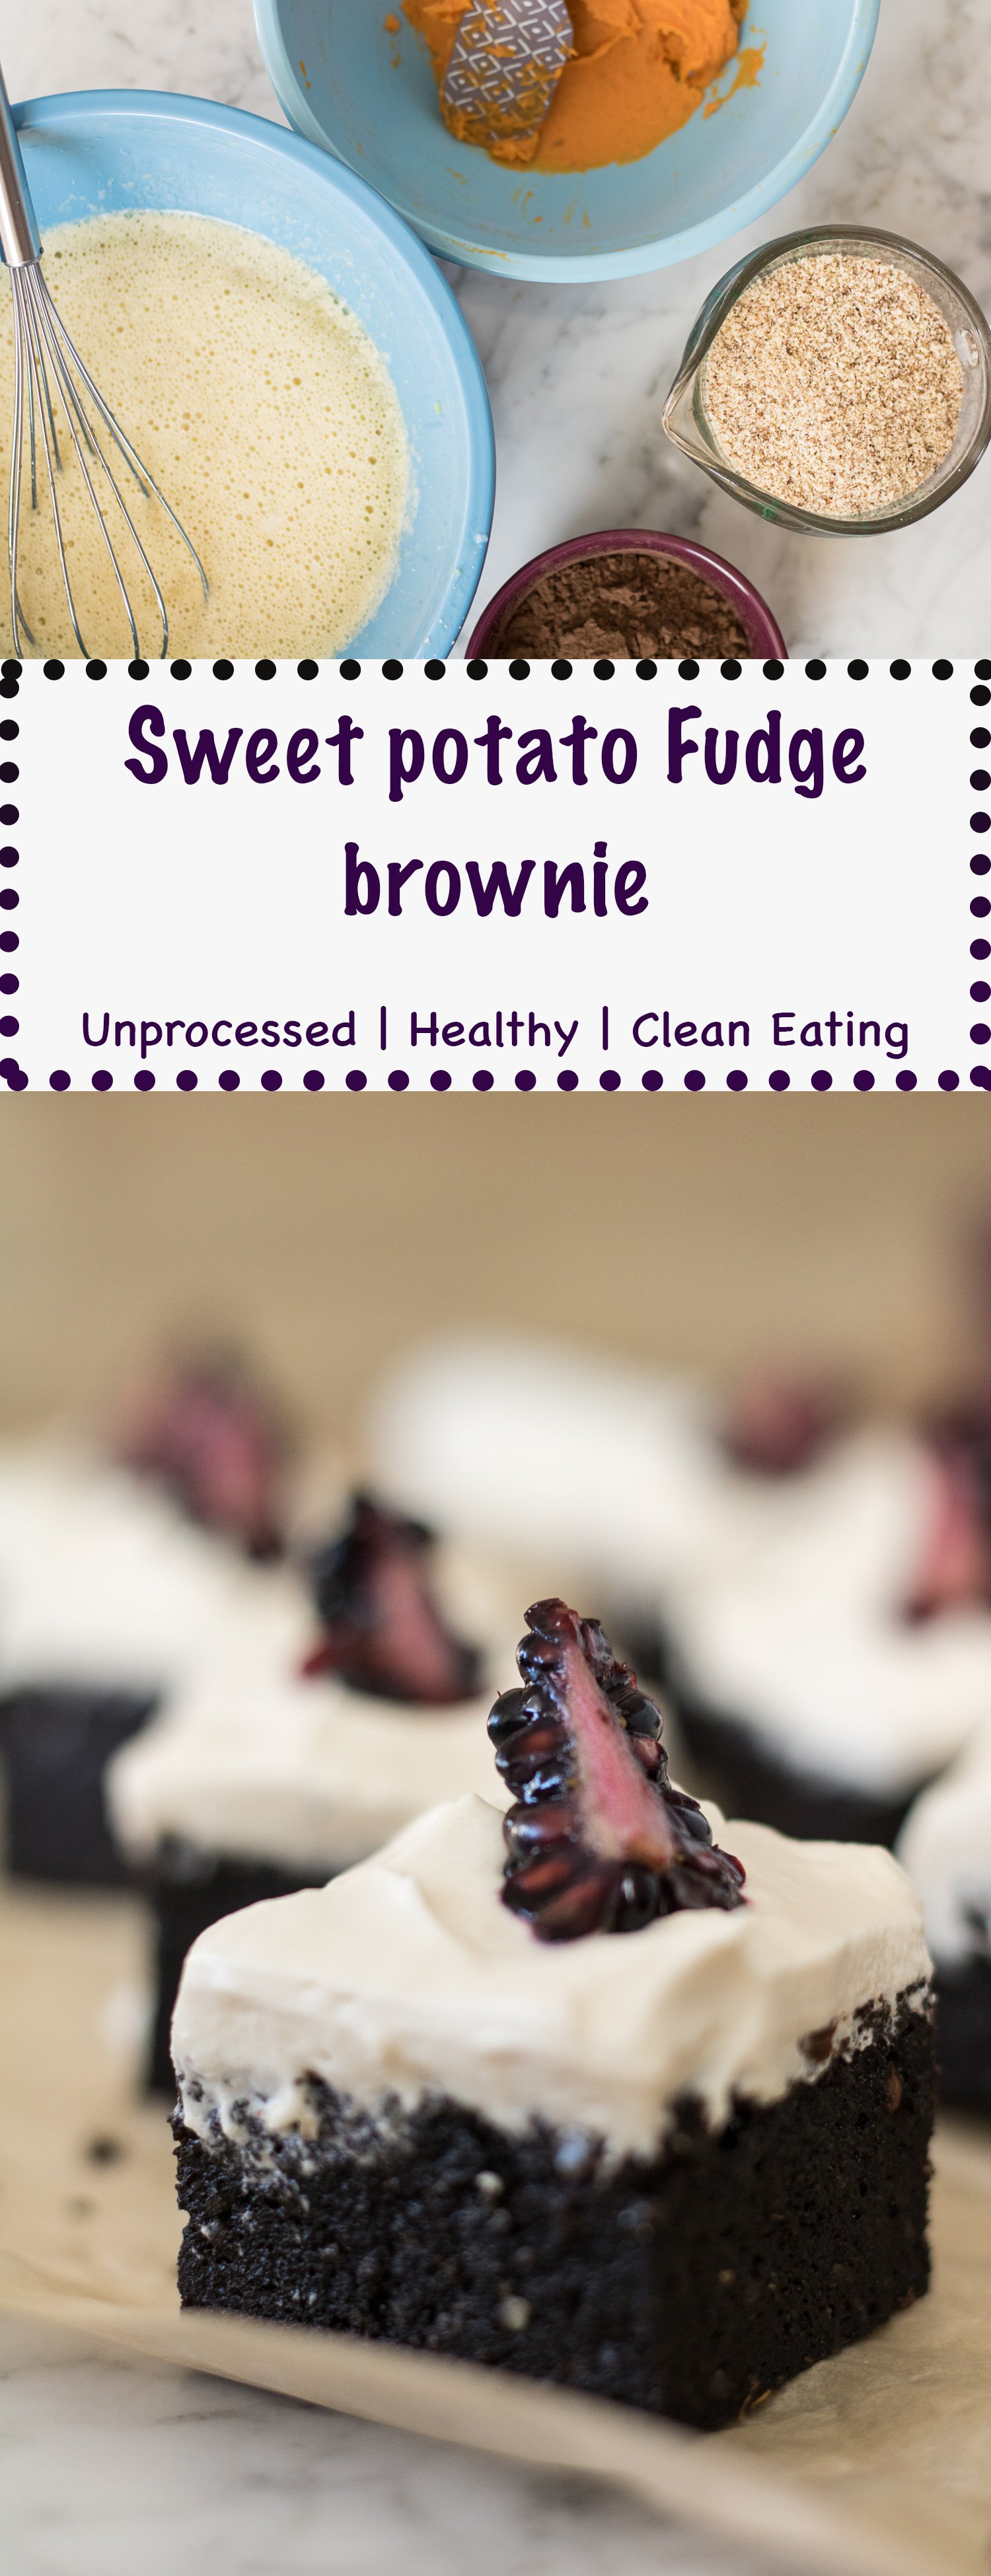 make sure to pin this awesome sweet potato fudge brownie on pinterest